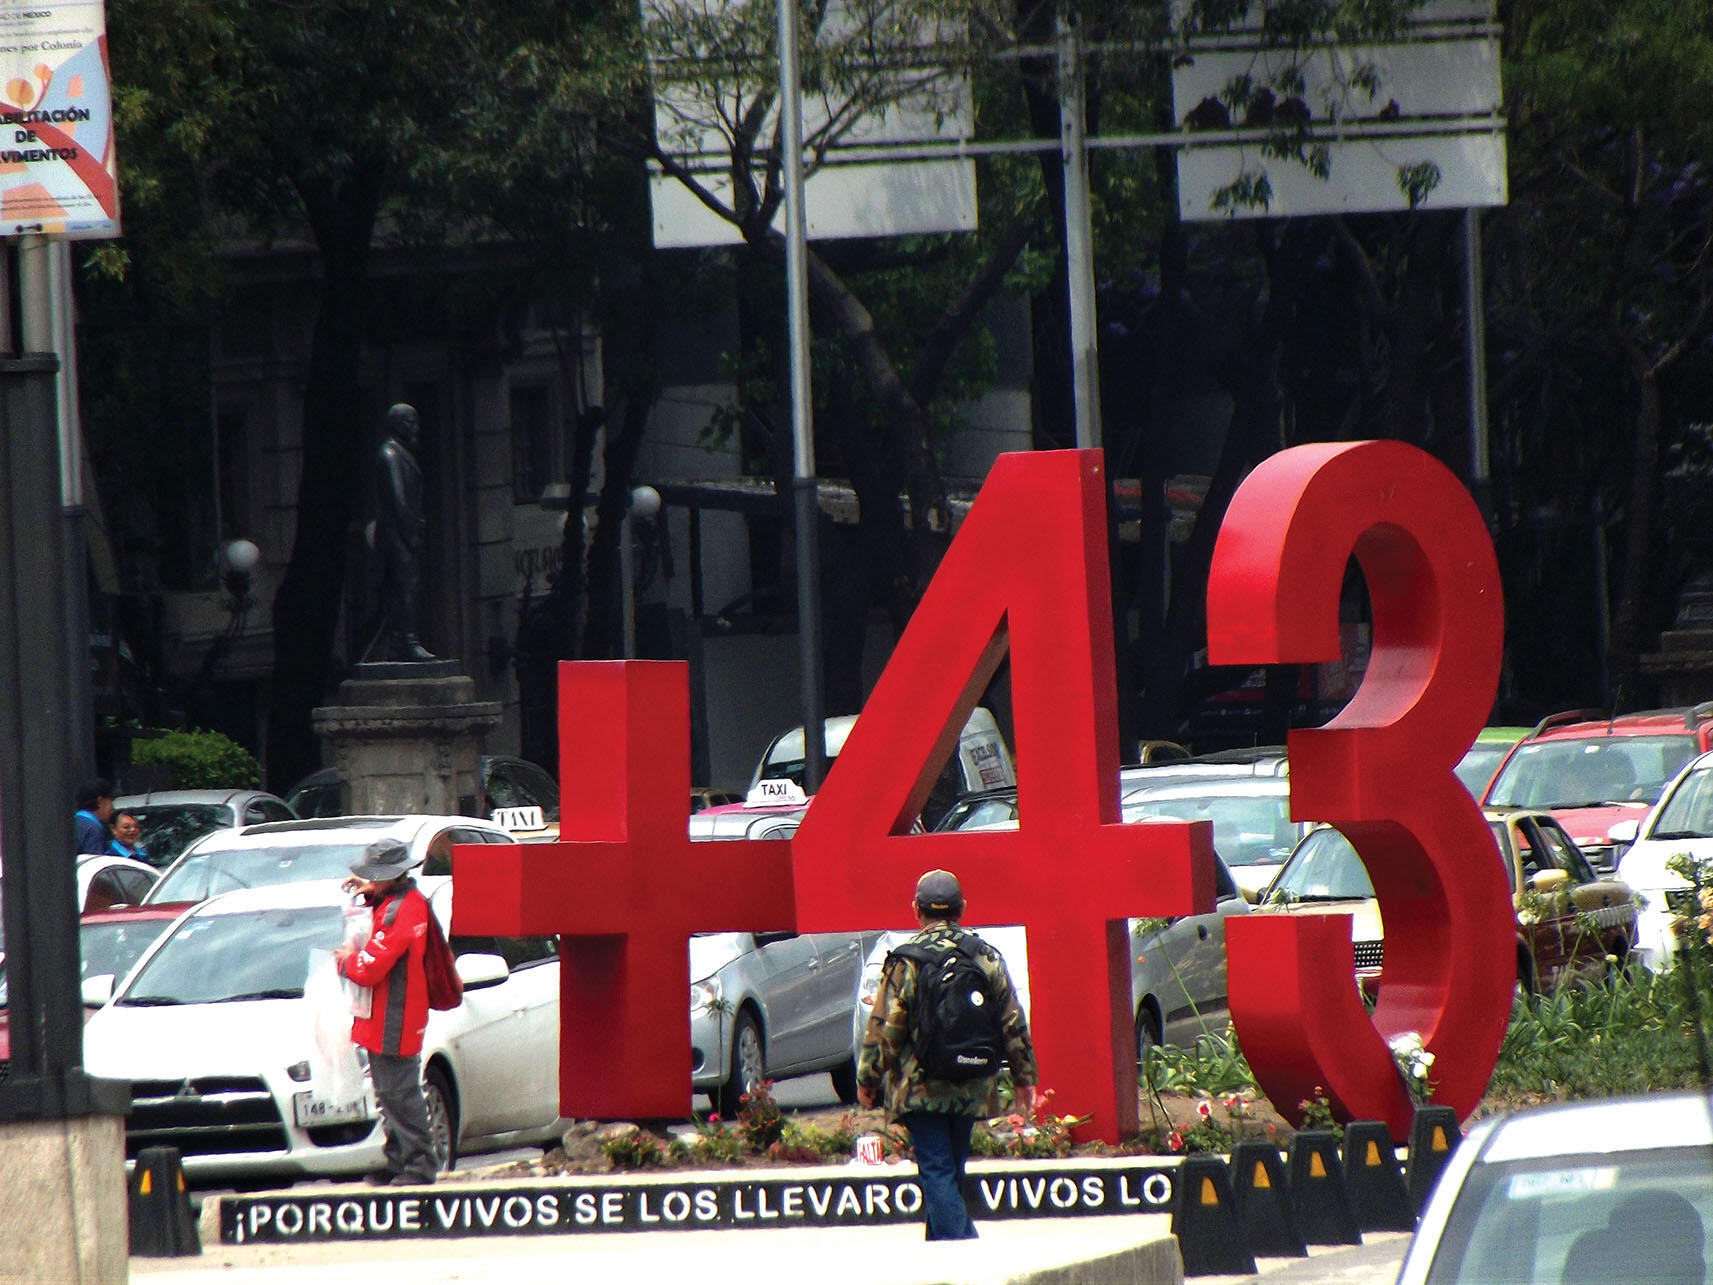 A large sculpture of the number 43 in Mexico City, a monument to the 43 disappeared students from Ayotzinapa. (Photo by Luis J. Romero.)